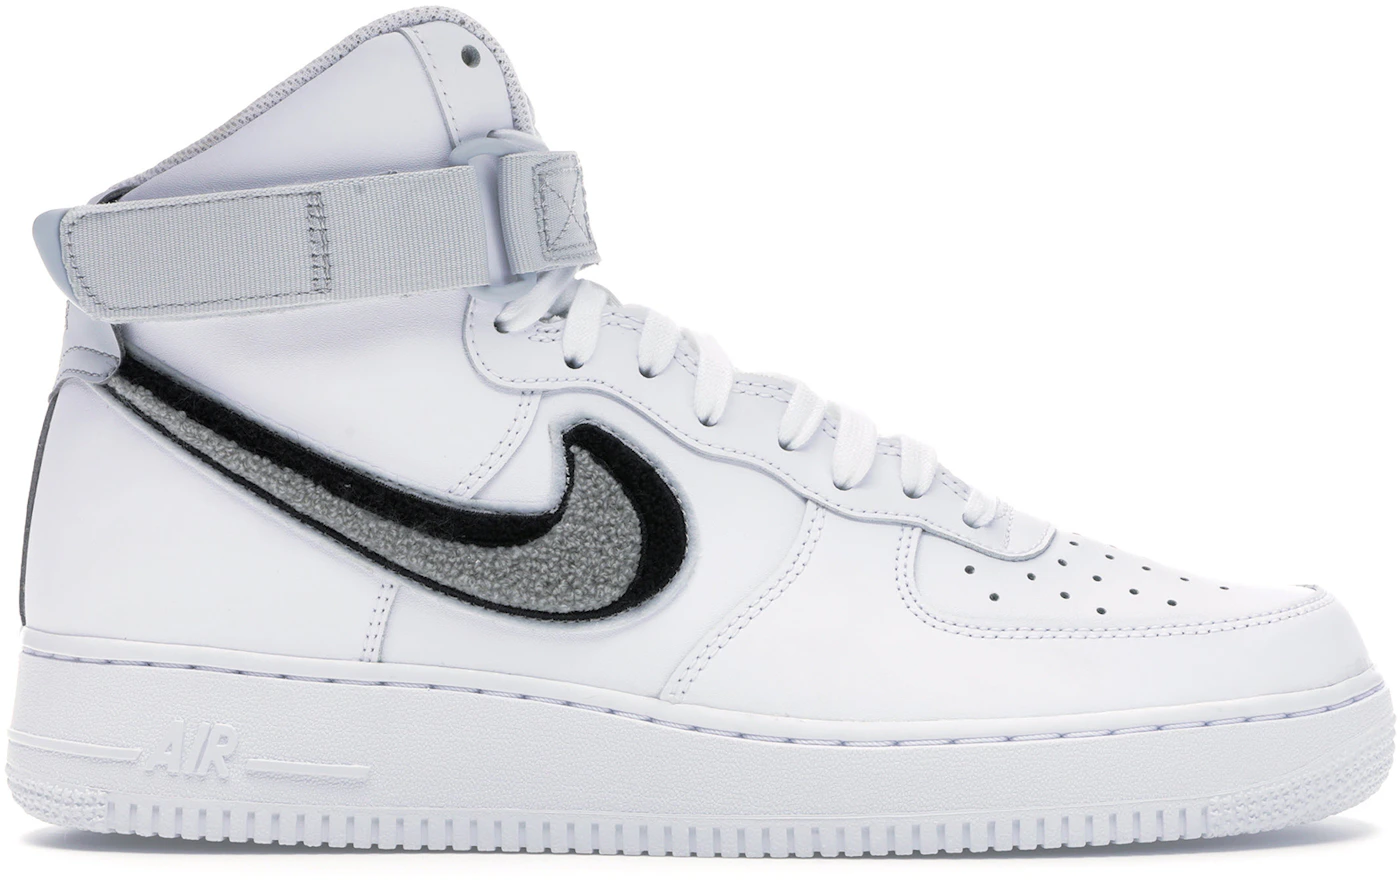 Nike Air Force 1 High '07 LV8 Men's Shoes White/Wolf Grey/Pure Platinum  806403-105 